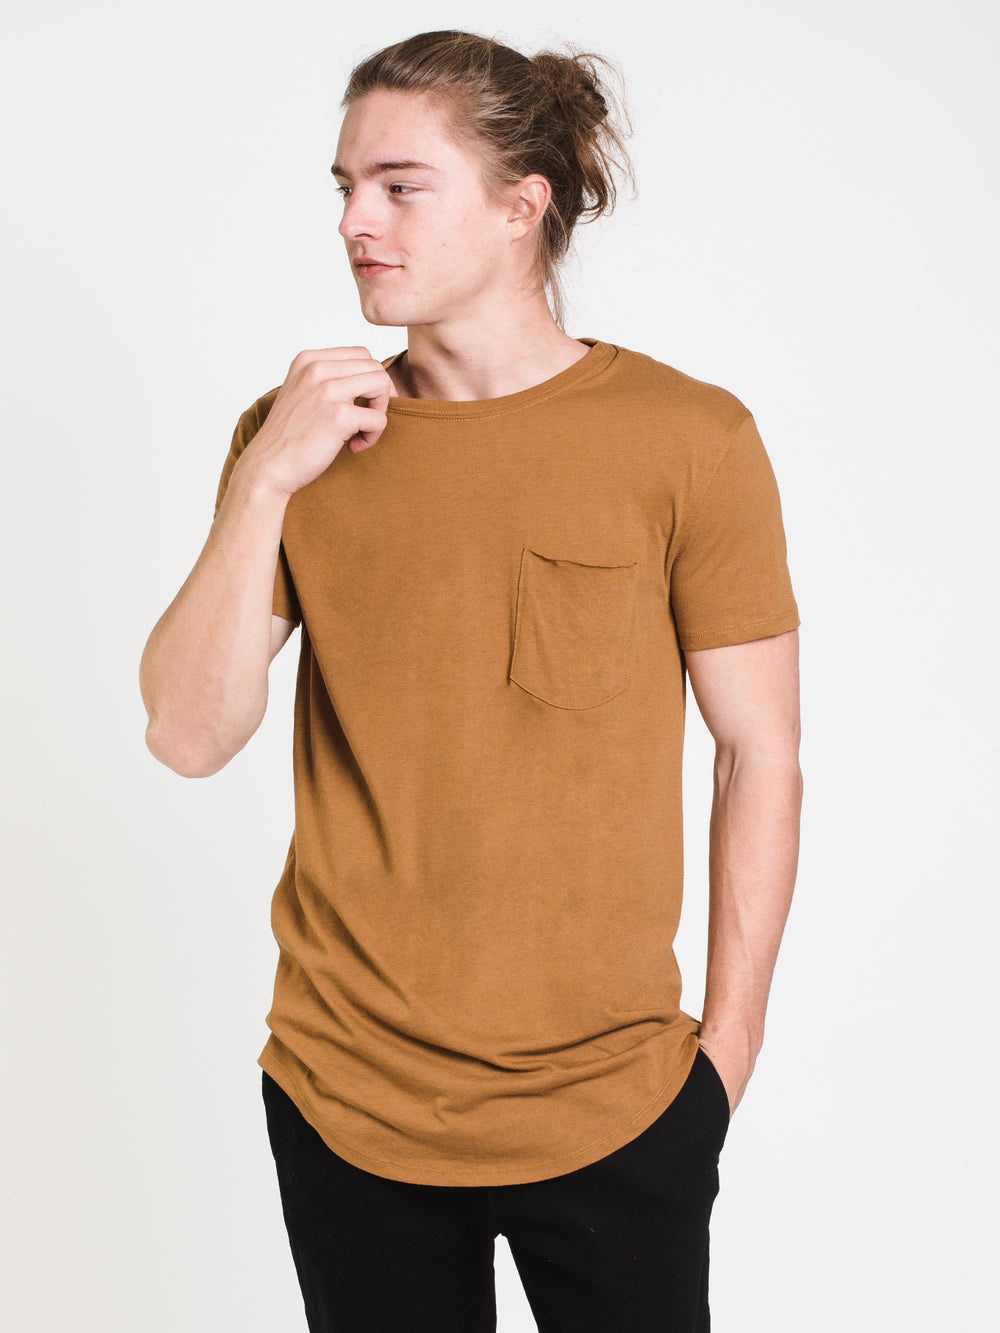 MENS LONGLINE T - TIMBER - CLEARANCE